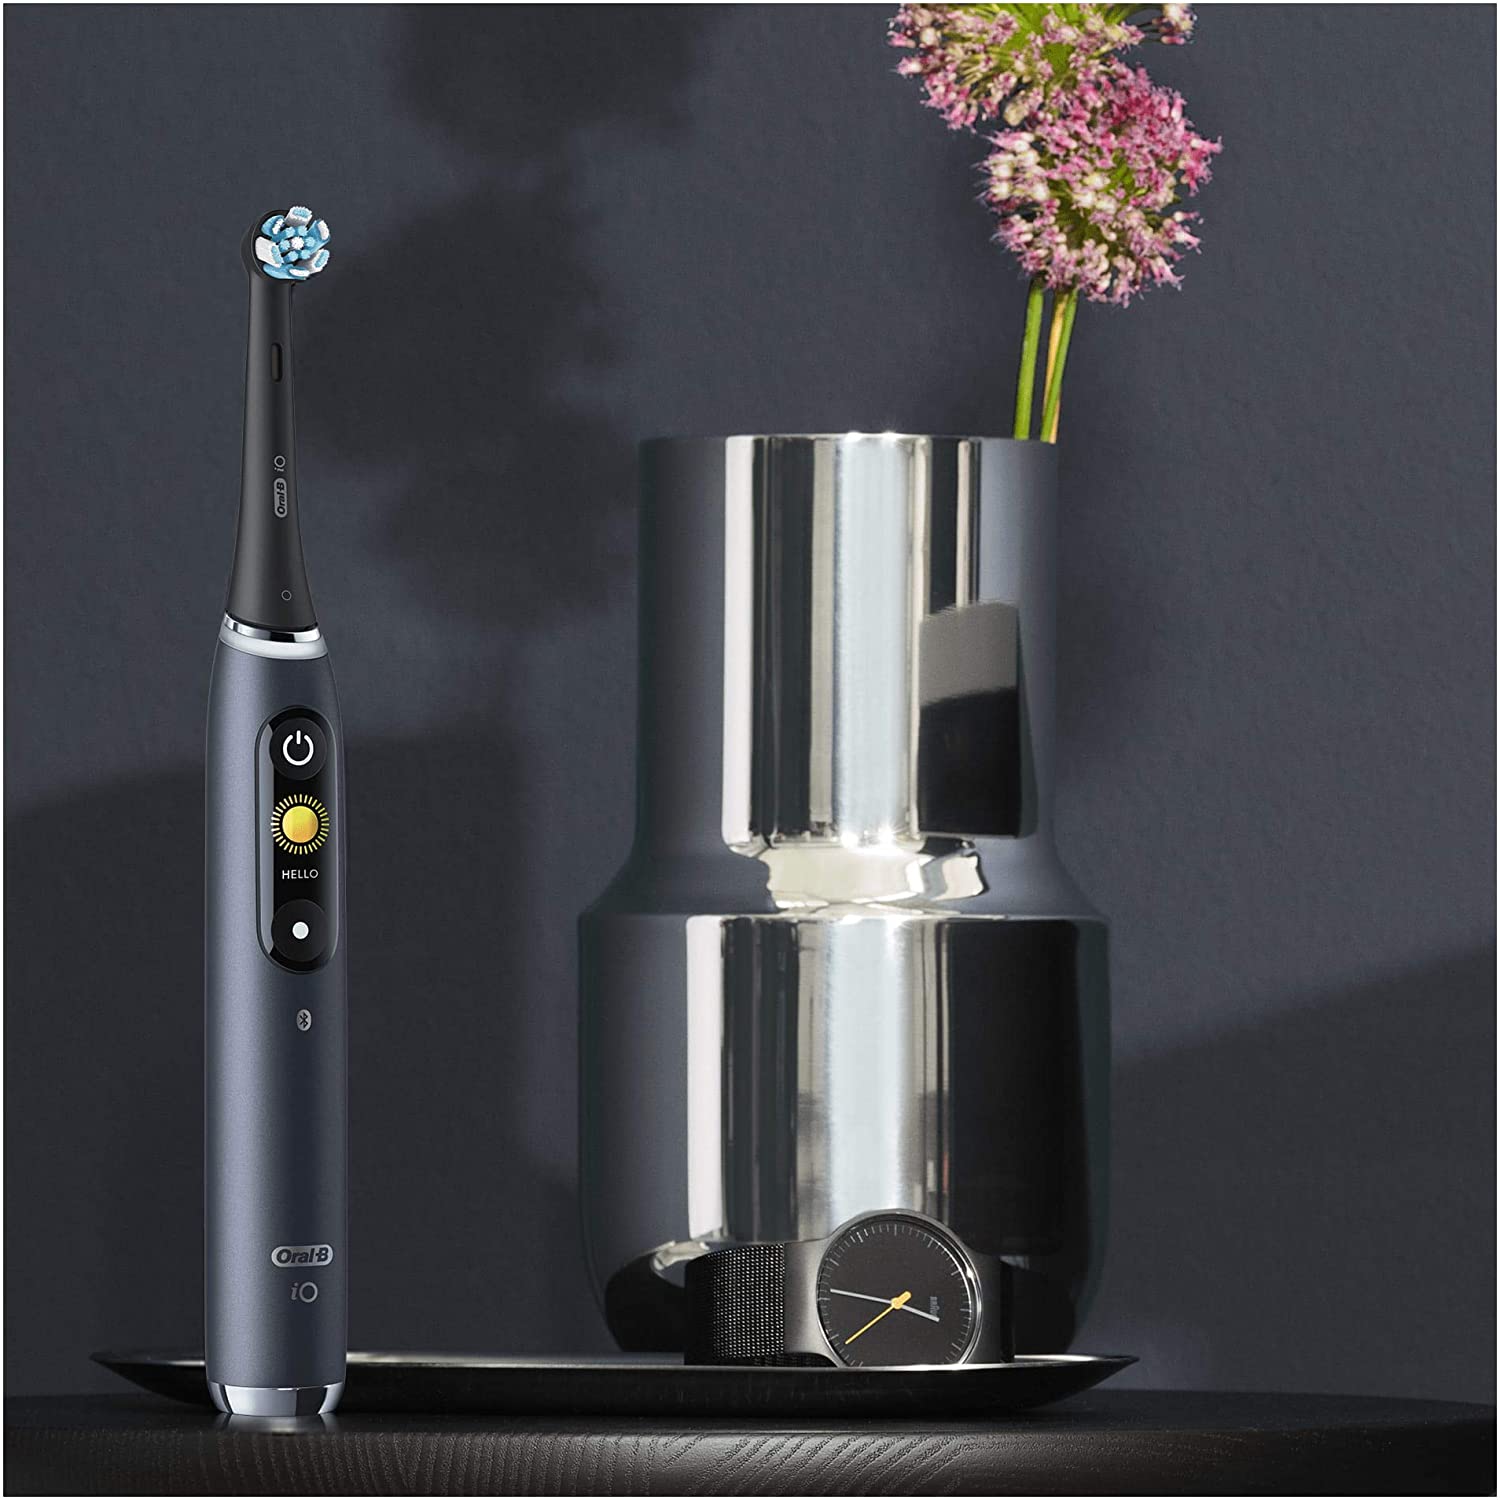 Braun Oral-B iO 9 Electric Toothbrush with Revolutionary Magnetic Technology - Black Onyx - Healthxpress.ie